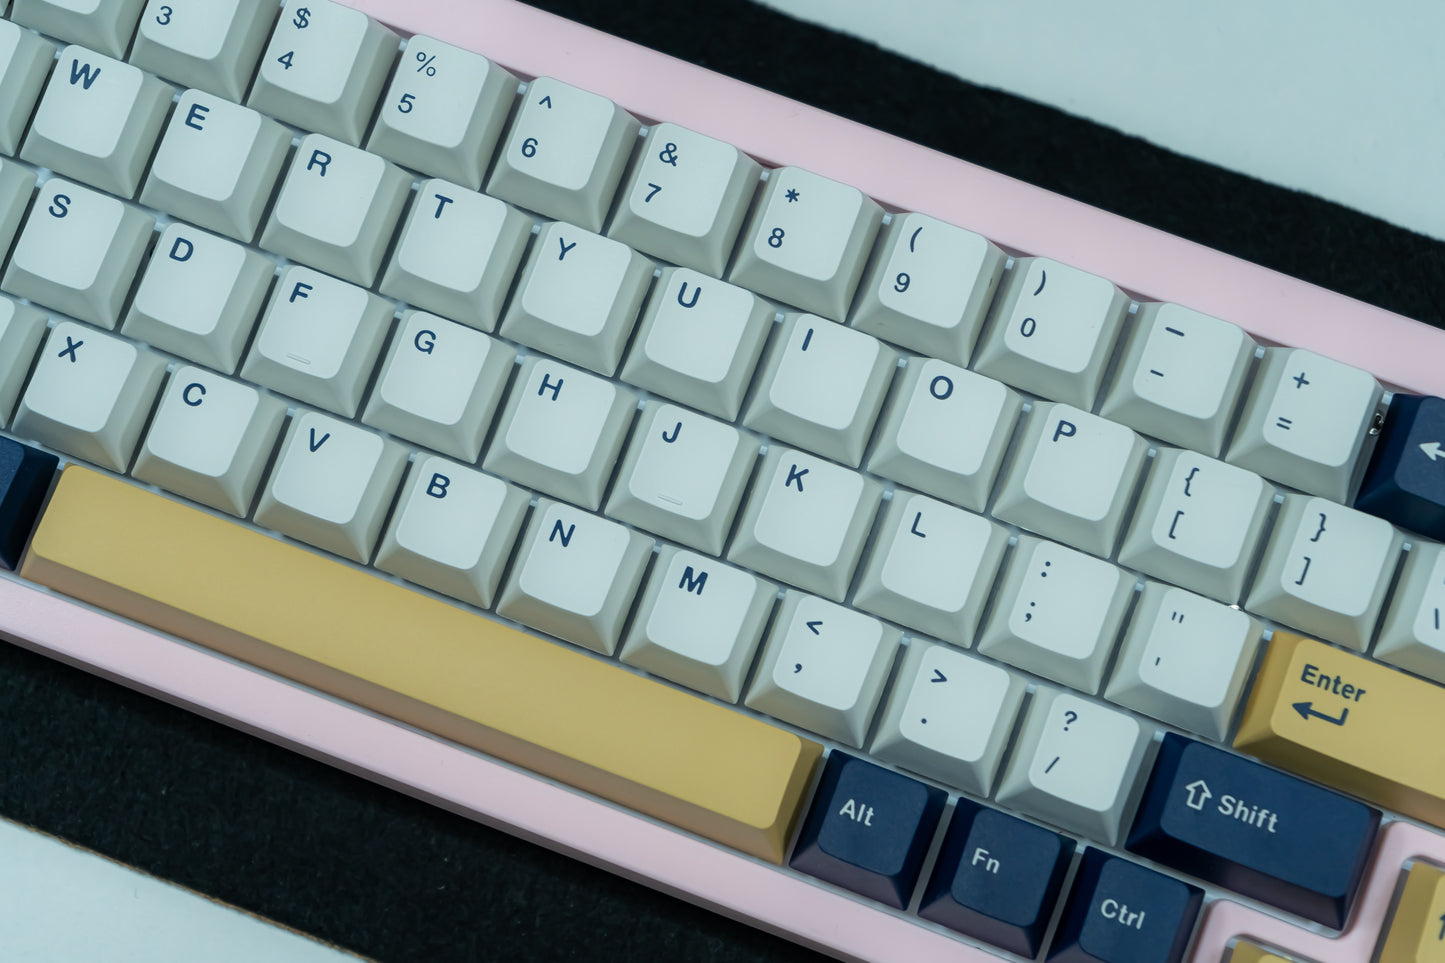 KF068 WITH PBT RUDY KEYCAPS / WIRELESS ASSEMBLED 65% HOT-SWAP MECHANICAL KEYBOARD